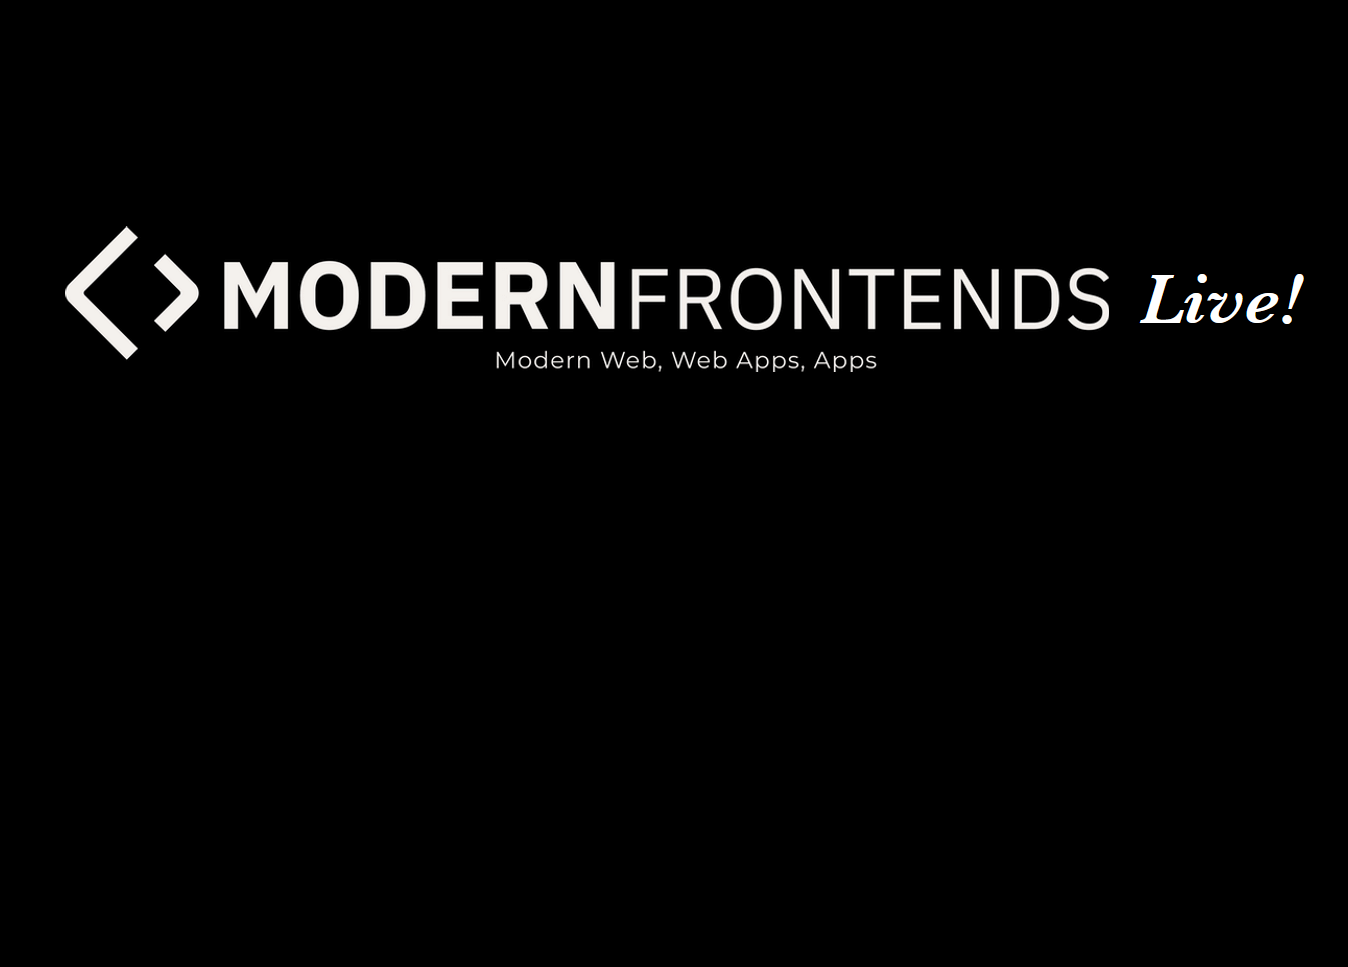 The Modern Frontends Live conference logo